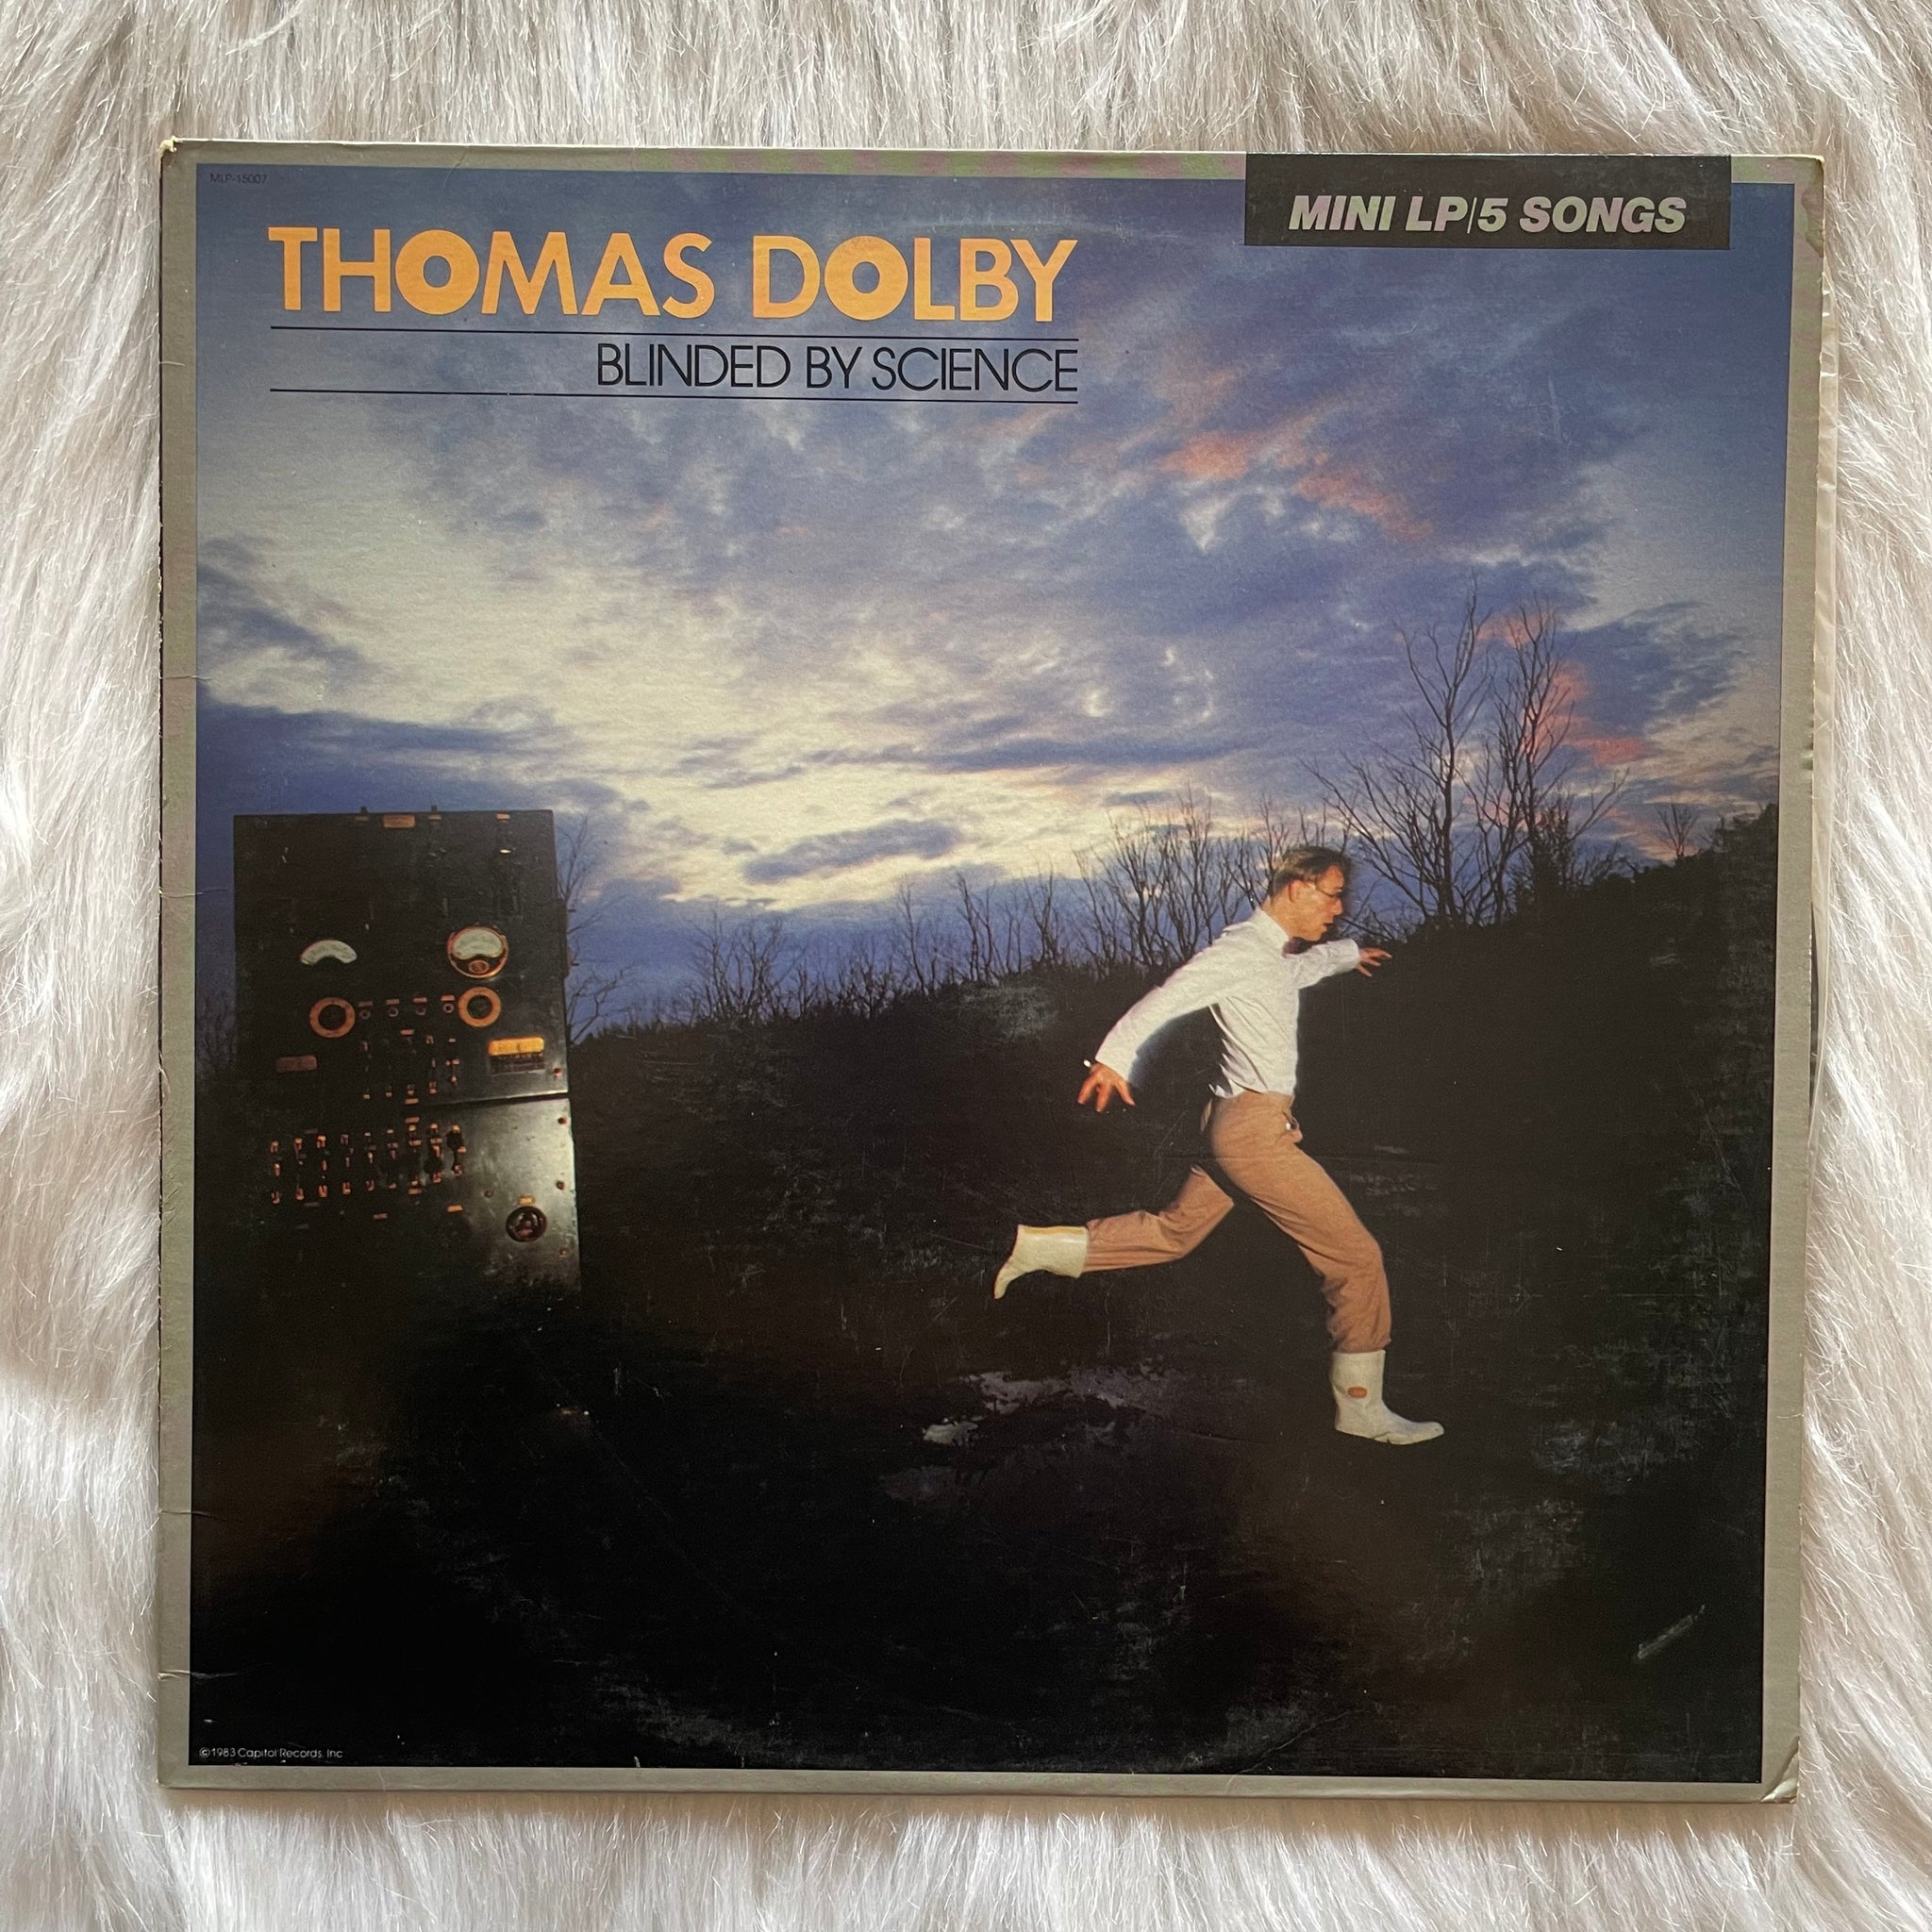 Thomas Dolby-Blinded by Science MINI LP